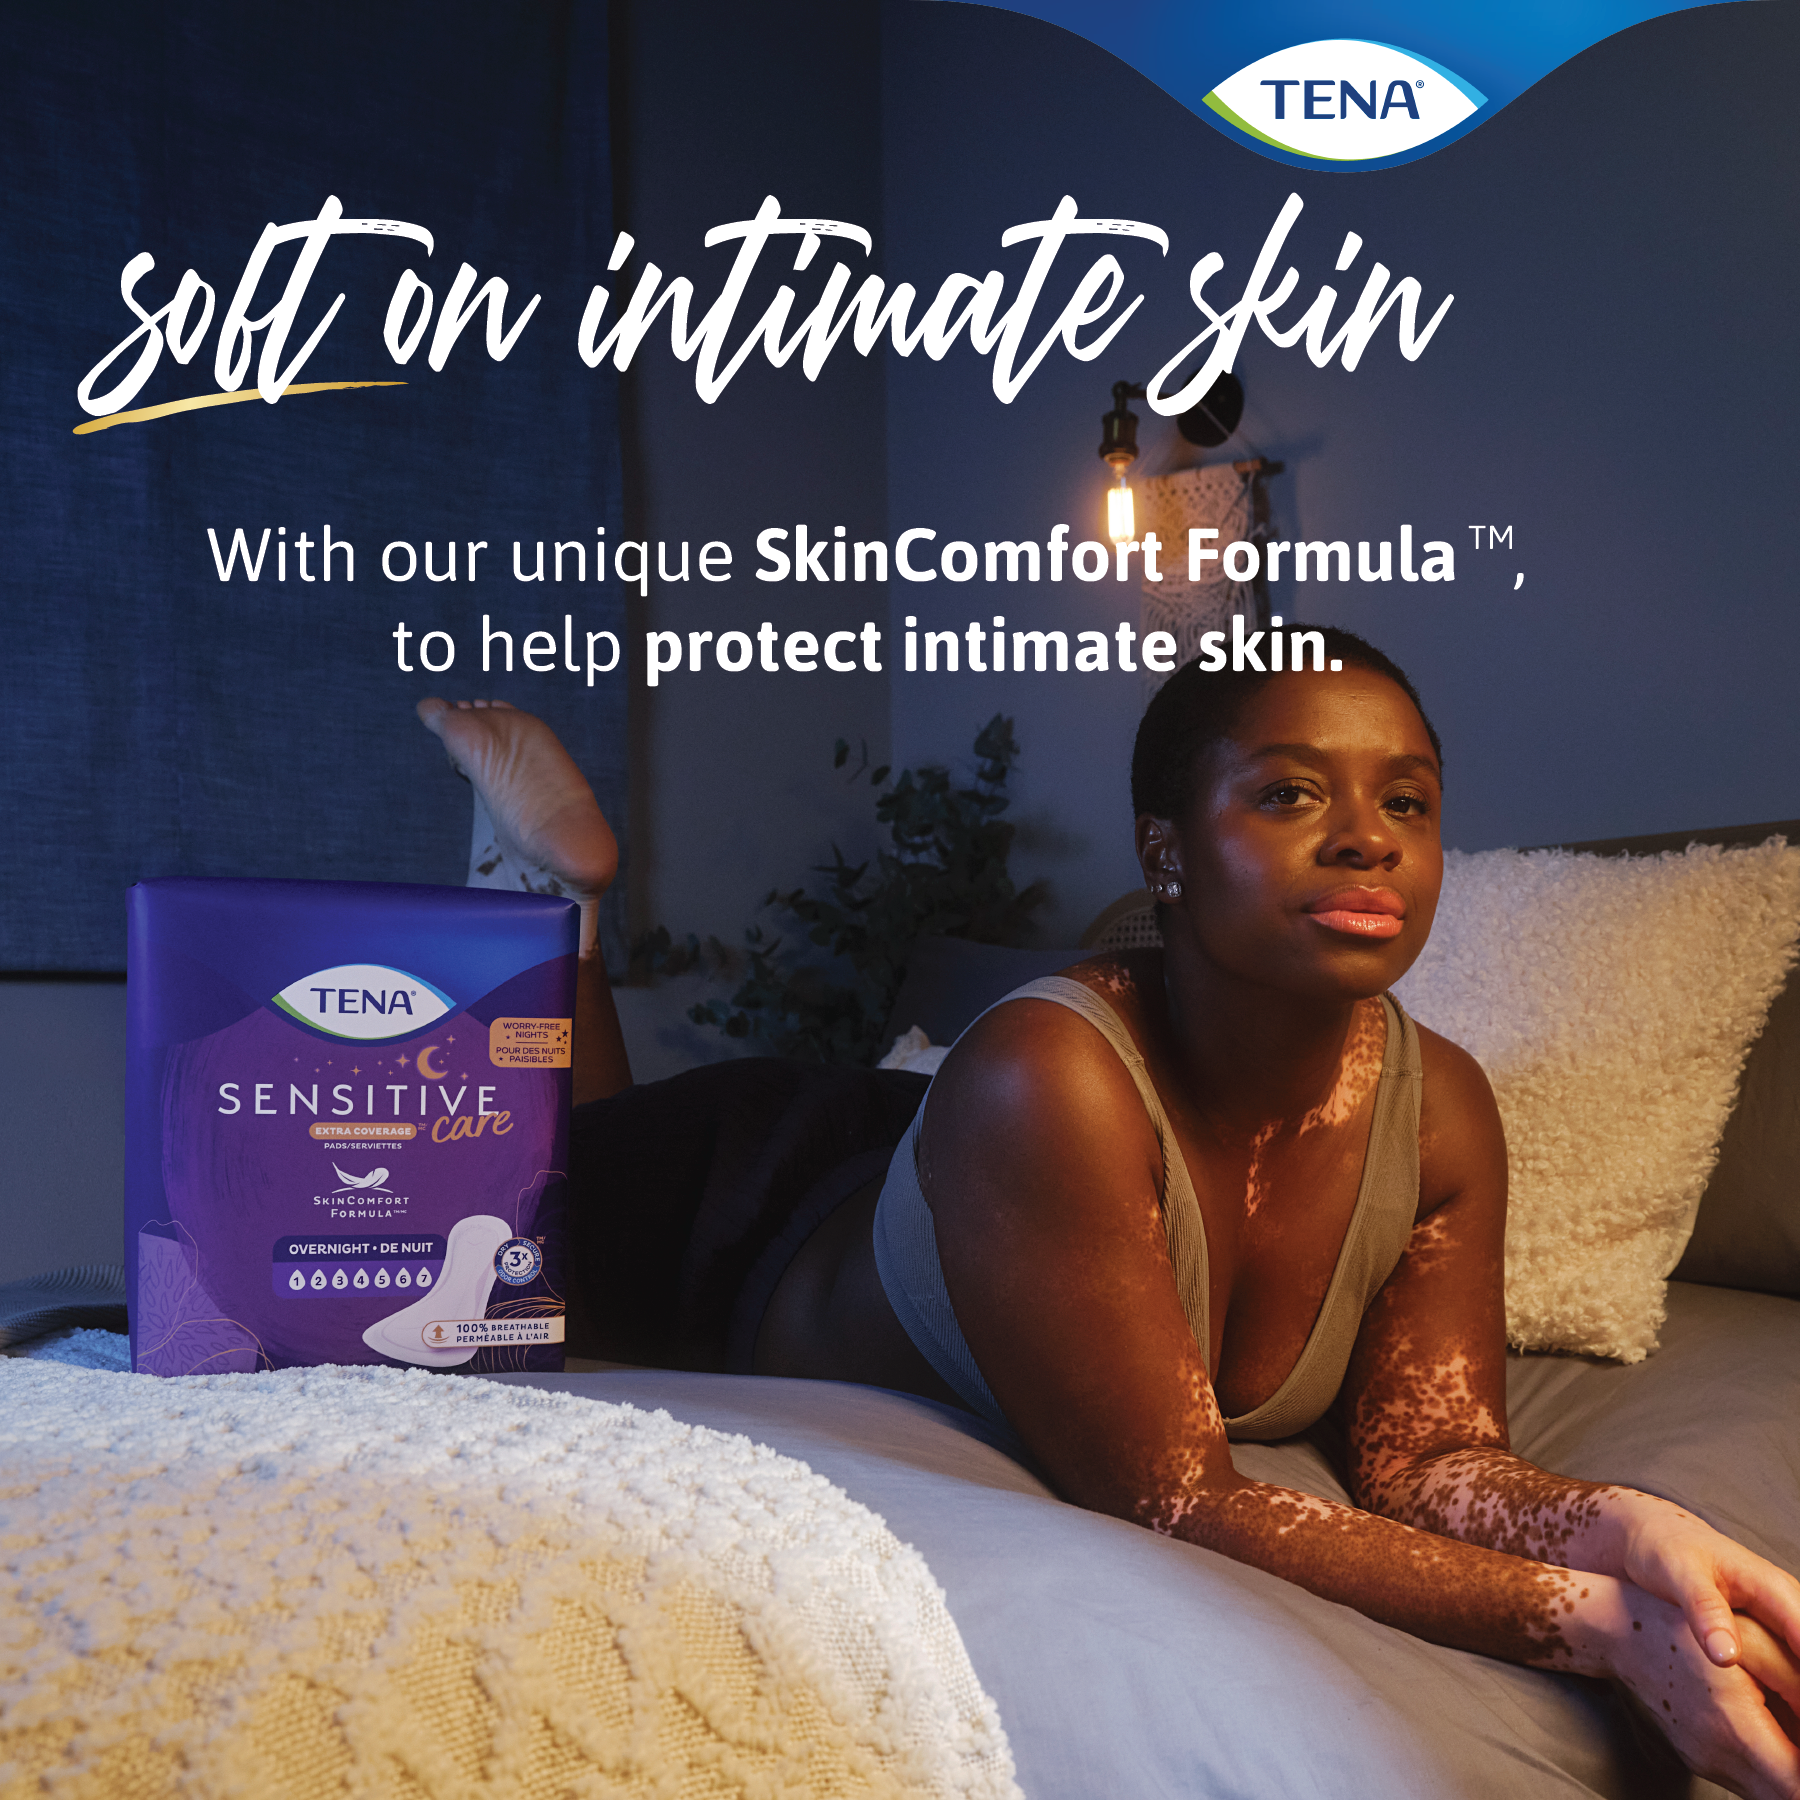 An image shows a woman lying on a bed next to a package of Overnight pads with the words, Soft on Intimate skin